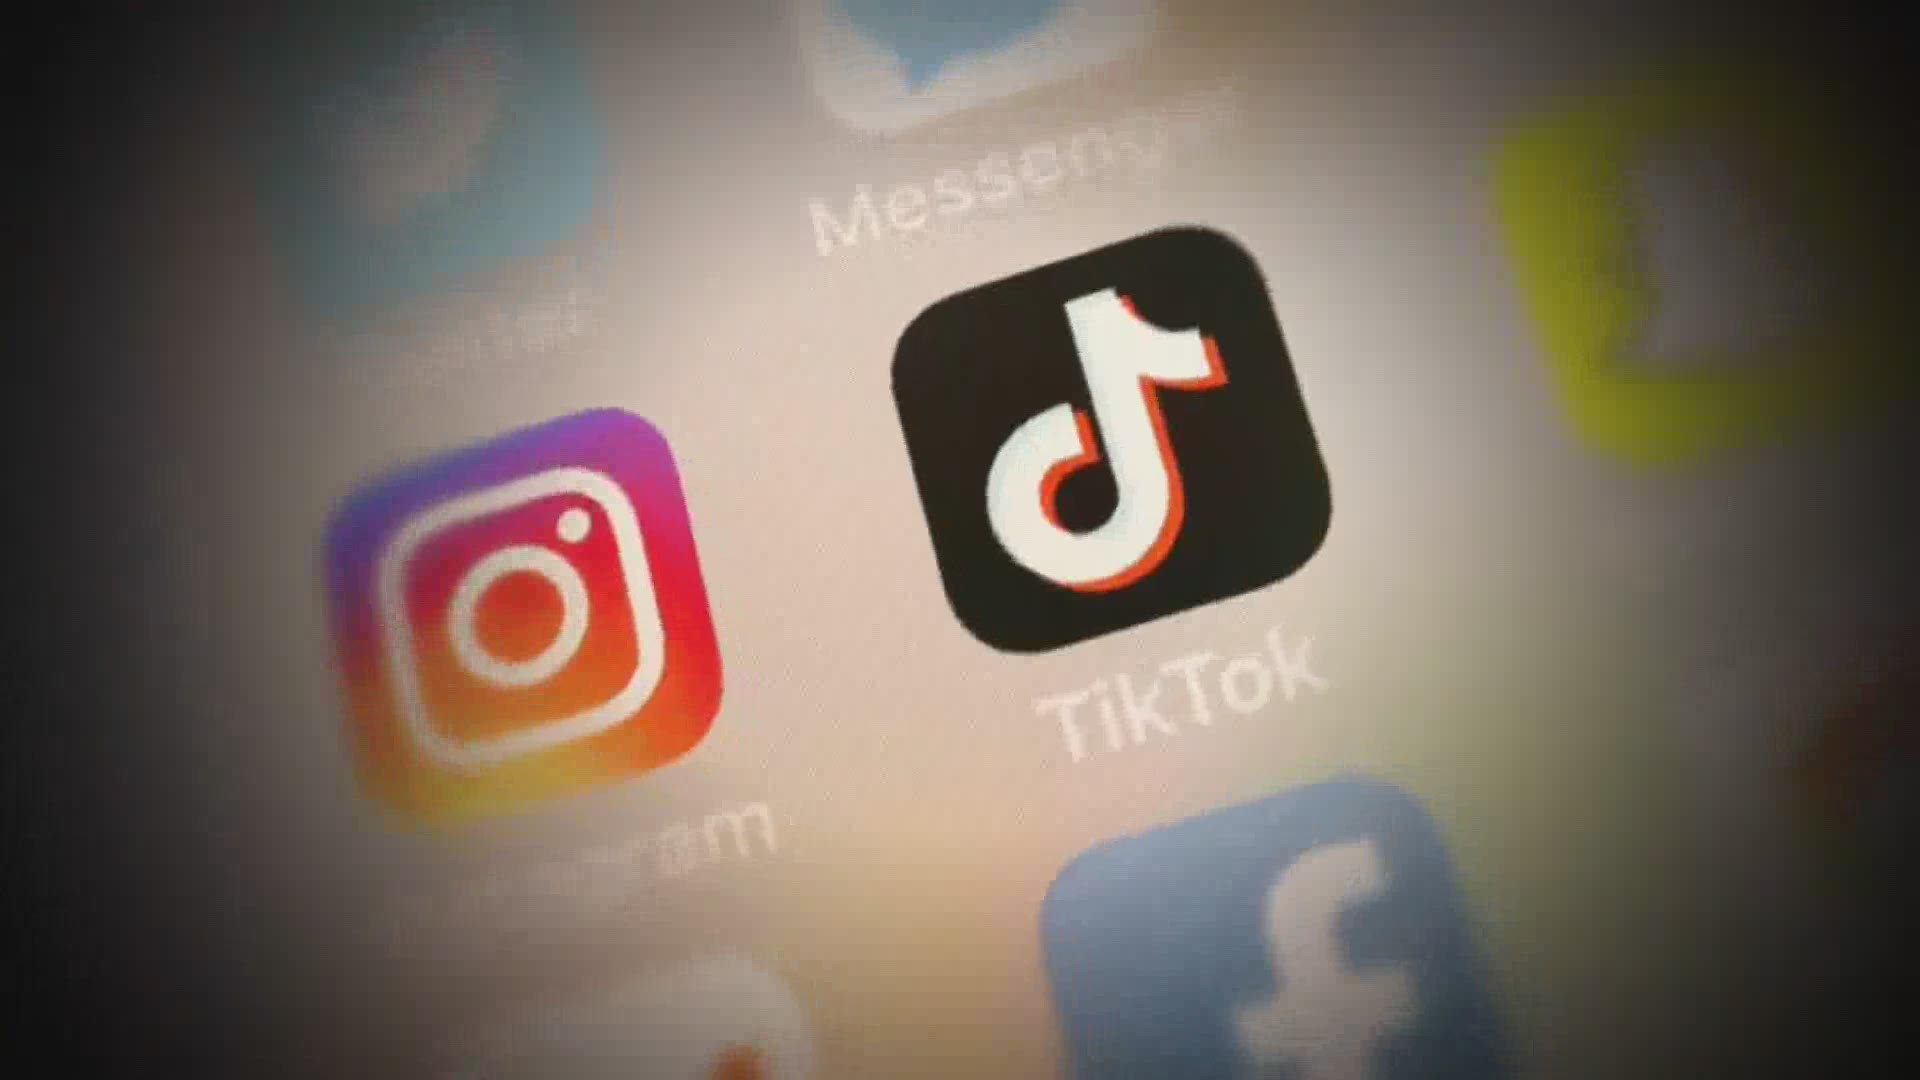 President Donald Trump has threatened to ban the app because the Chinese company that owns it could be sharing the data of U.S. citizens who use it.